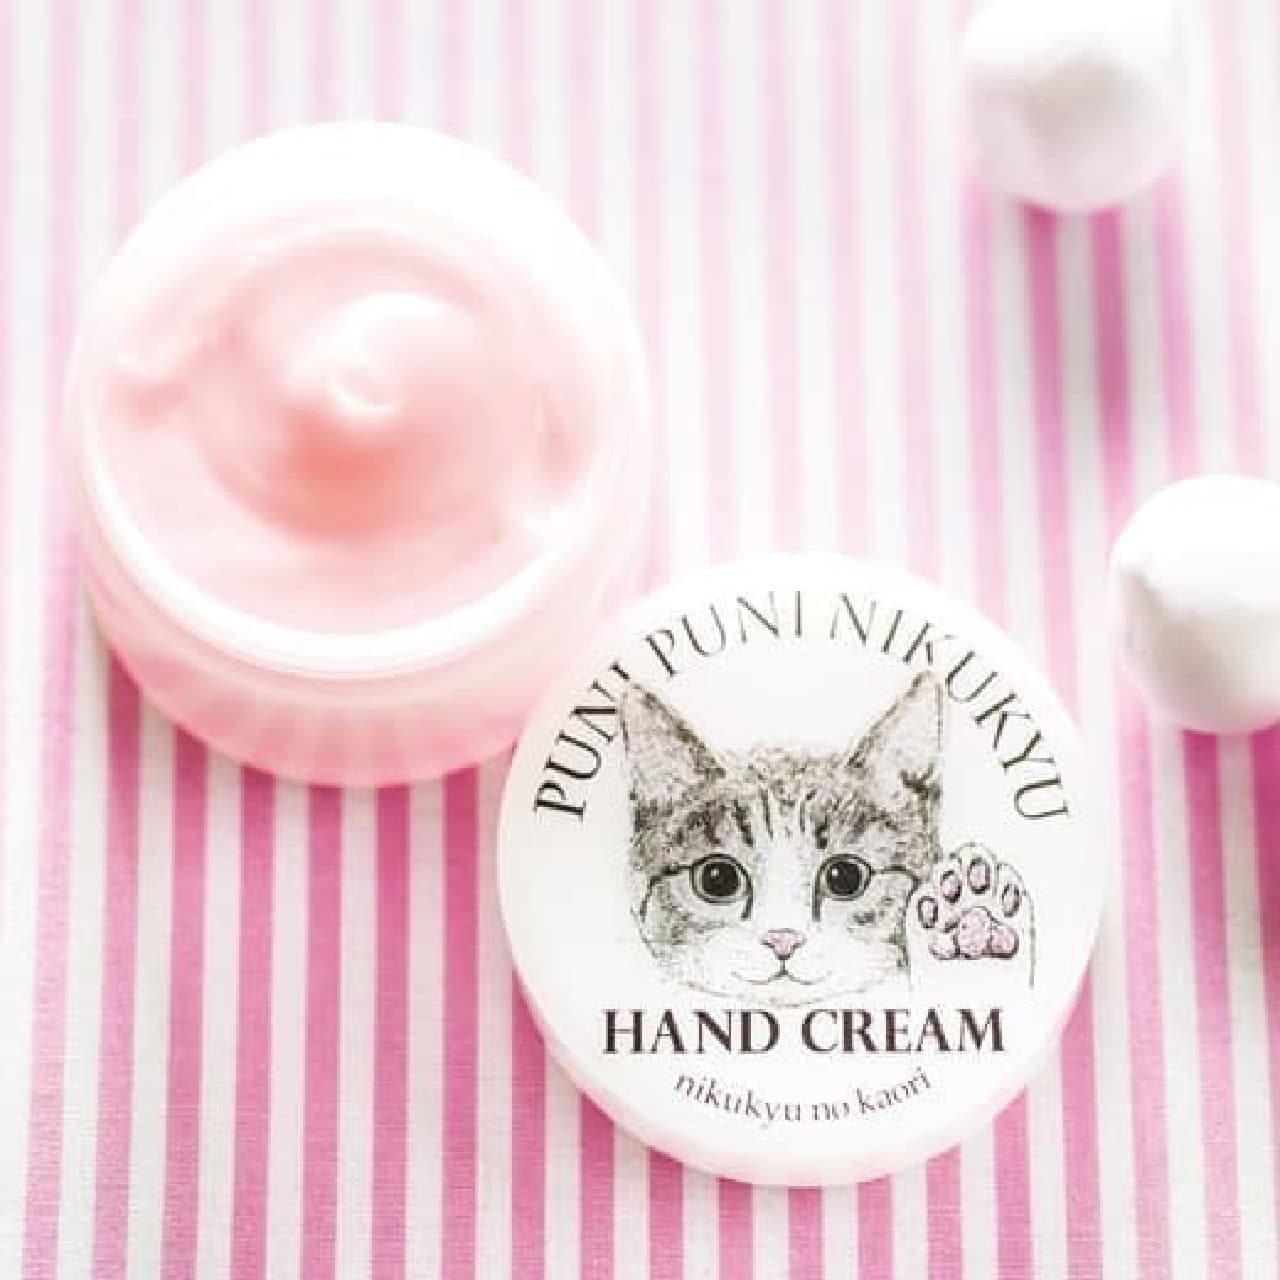 Cooperated in the development of "Paw Scent Hand Cream"